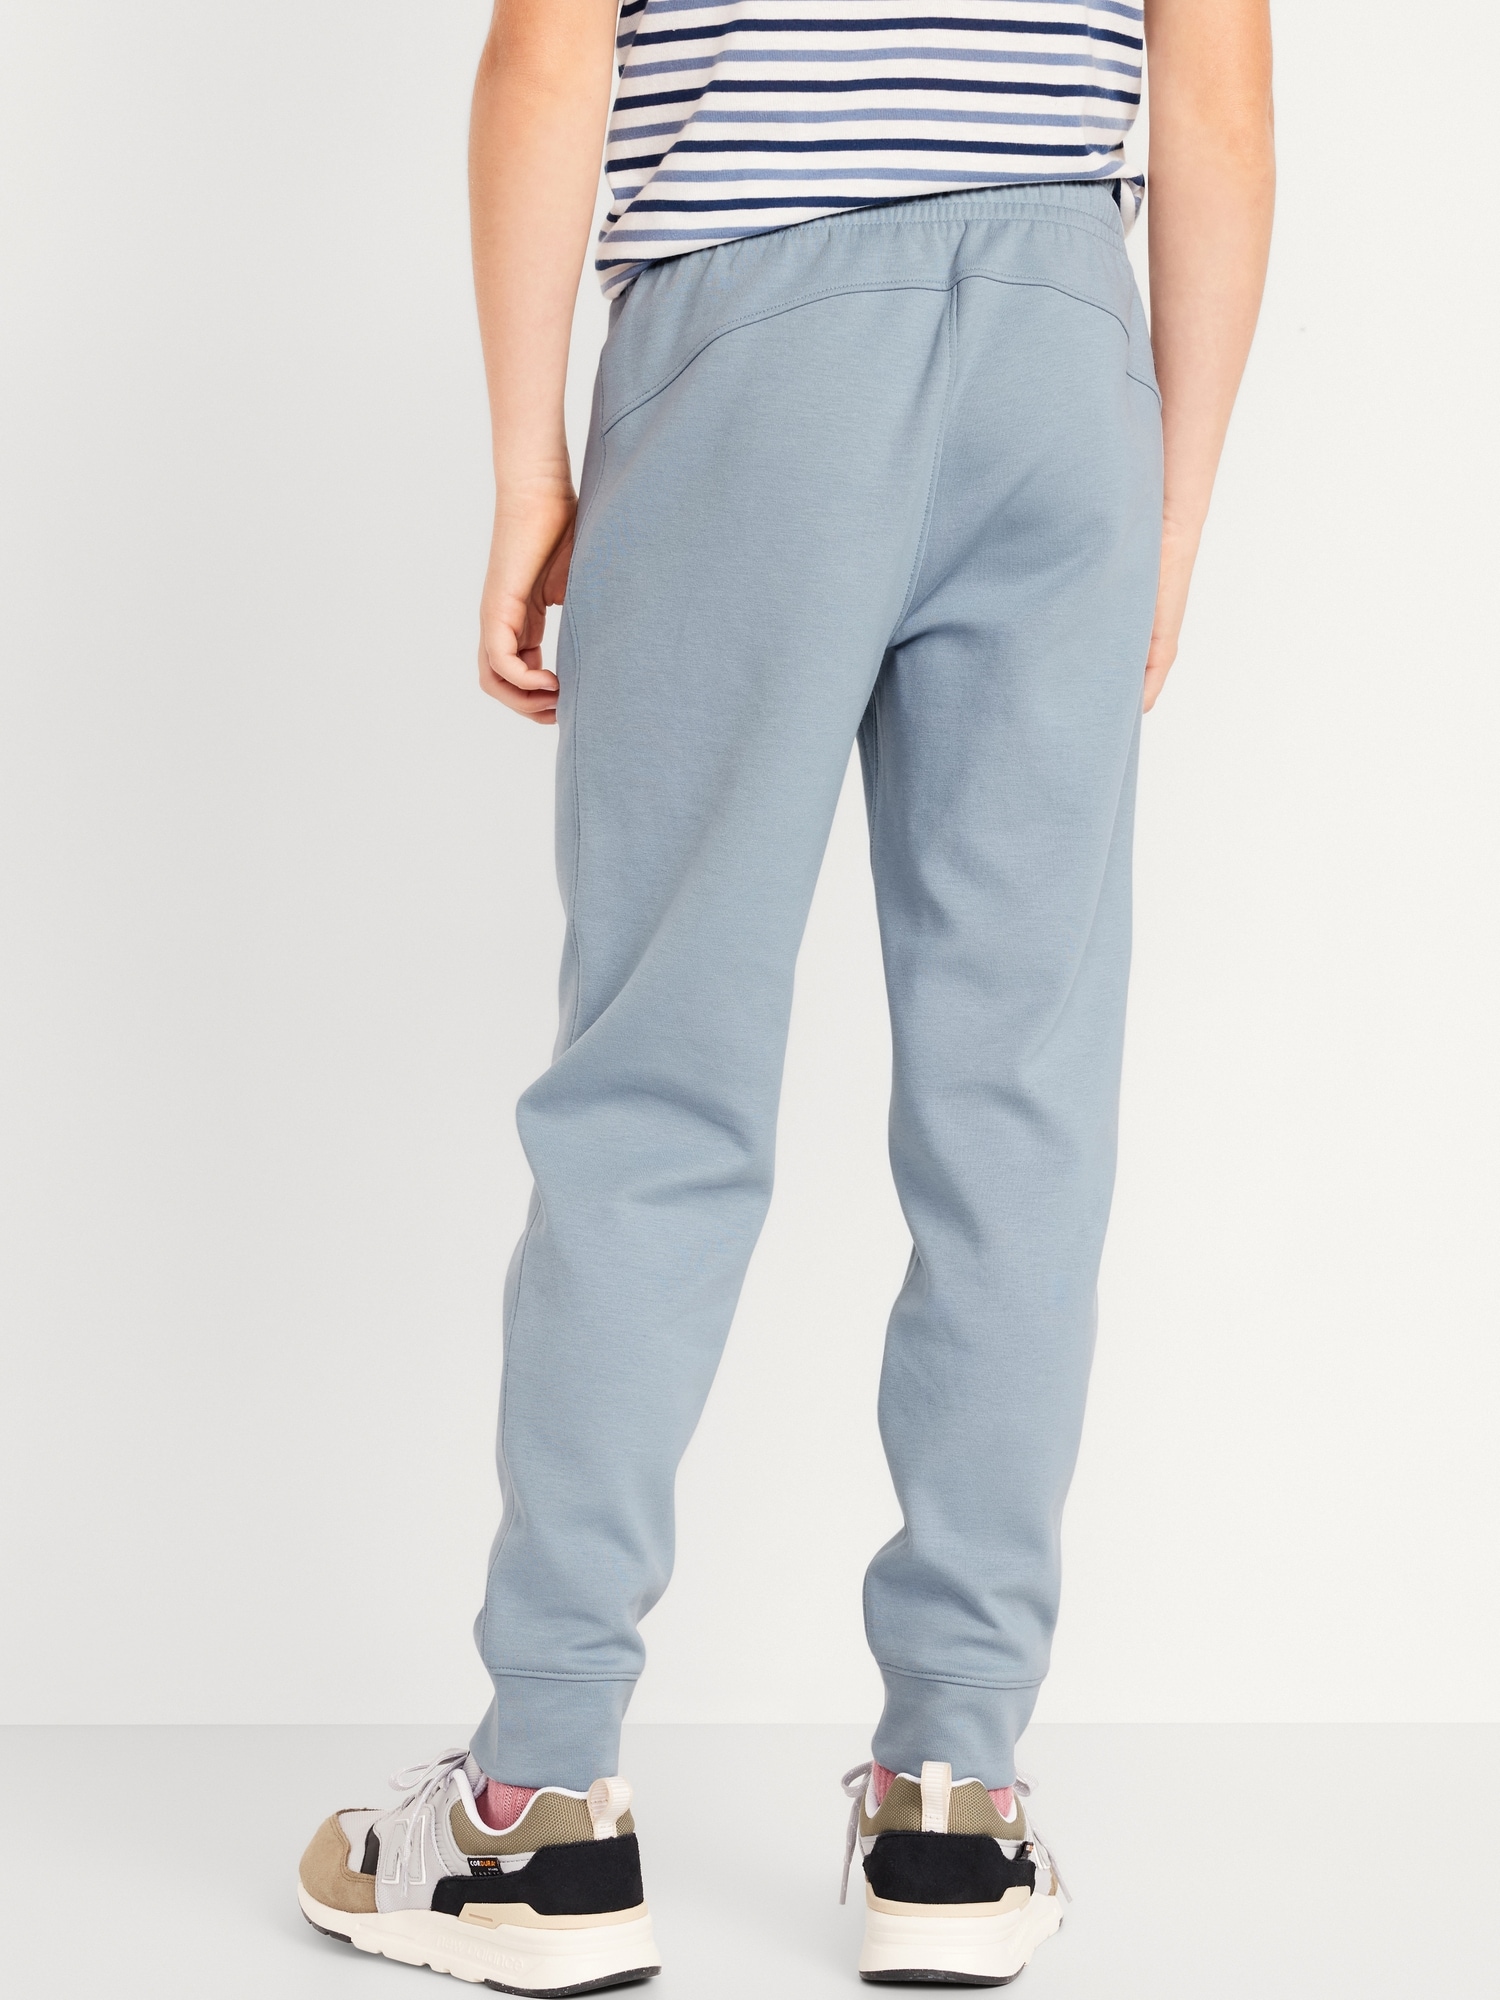 Old Navy Textured Dynamic Fleece Tapered Sweatpants